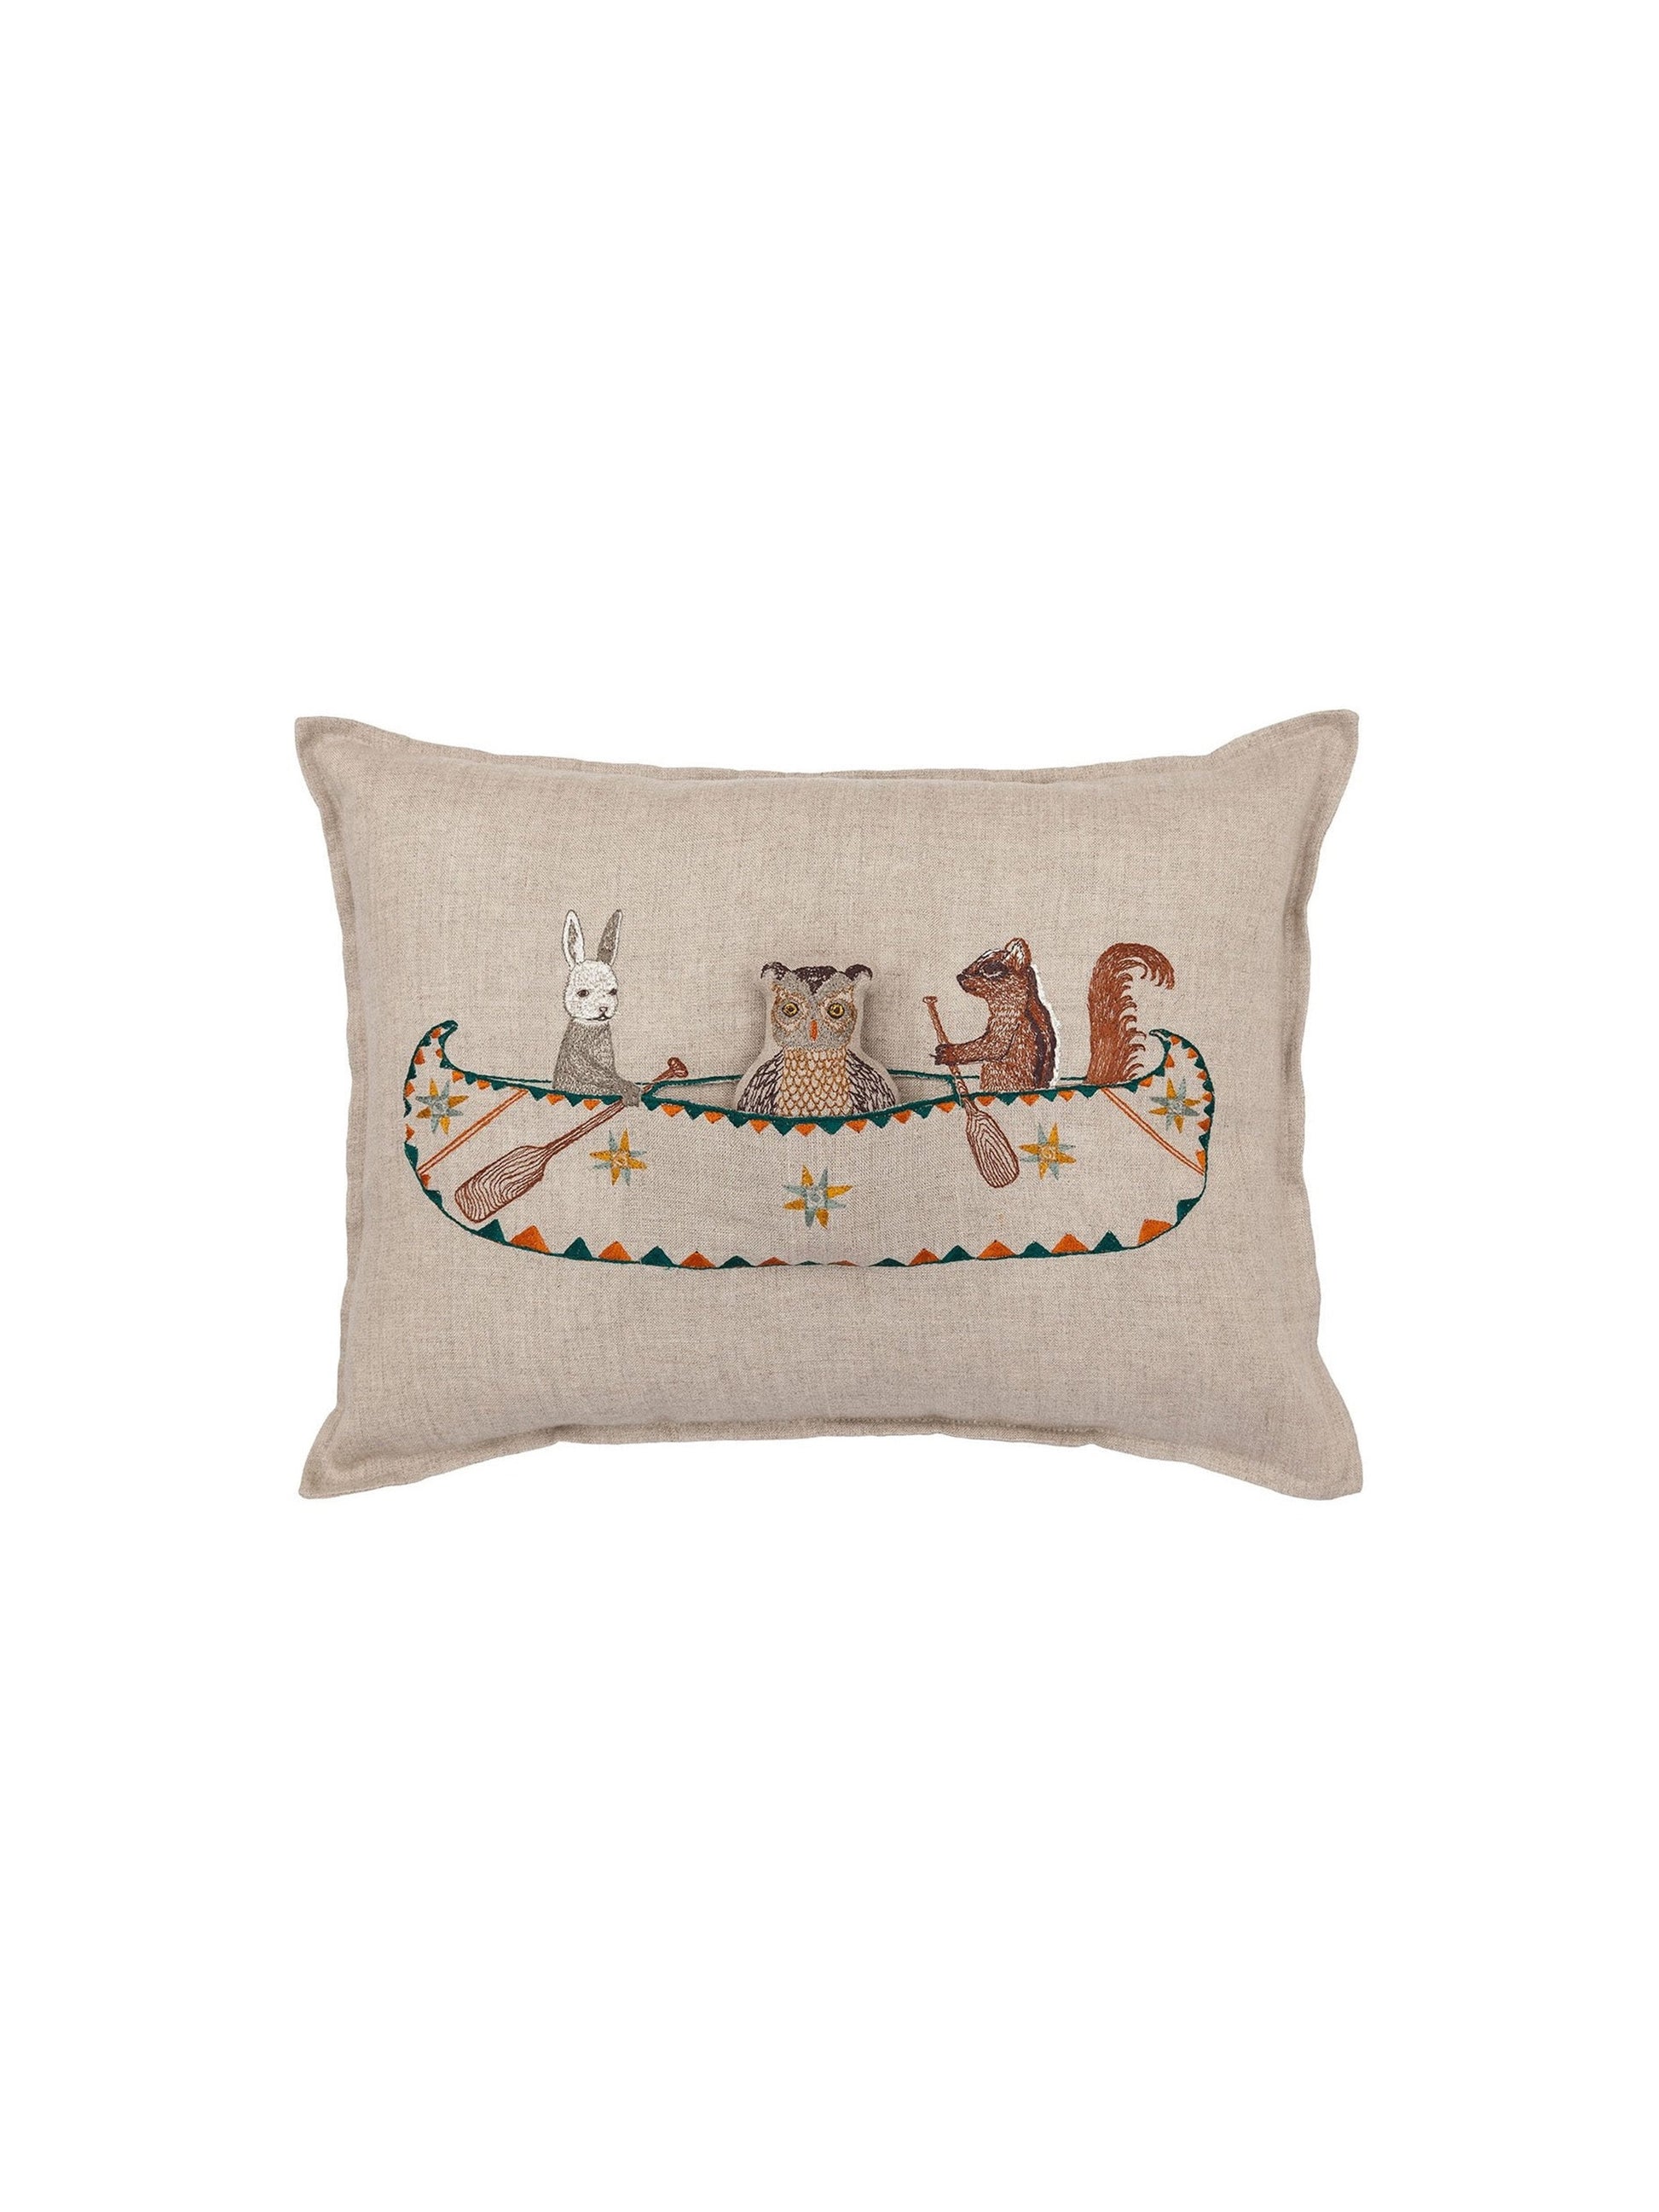 Coral & Tusk Friends Canoe Pocket Pillow Weston Table